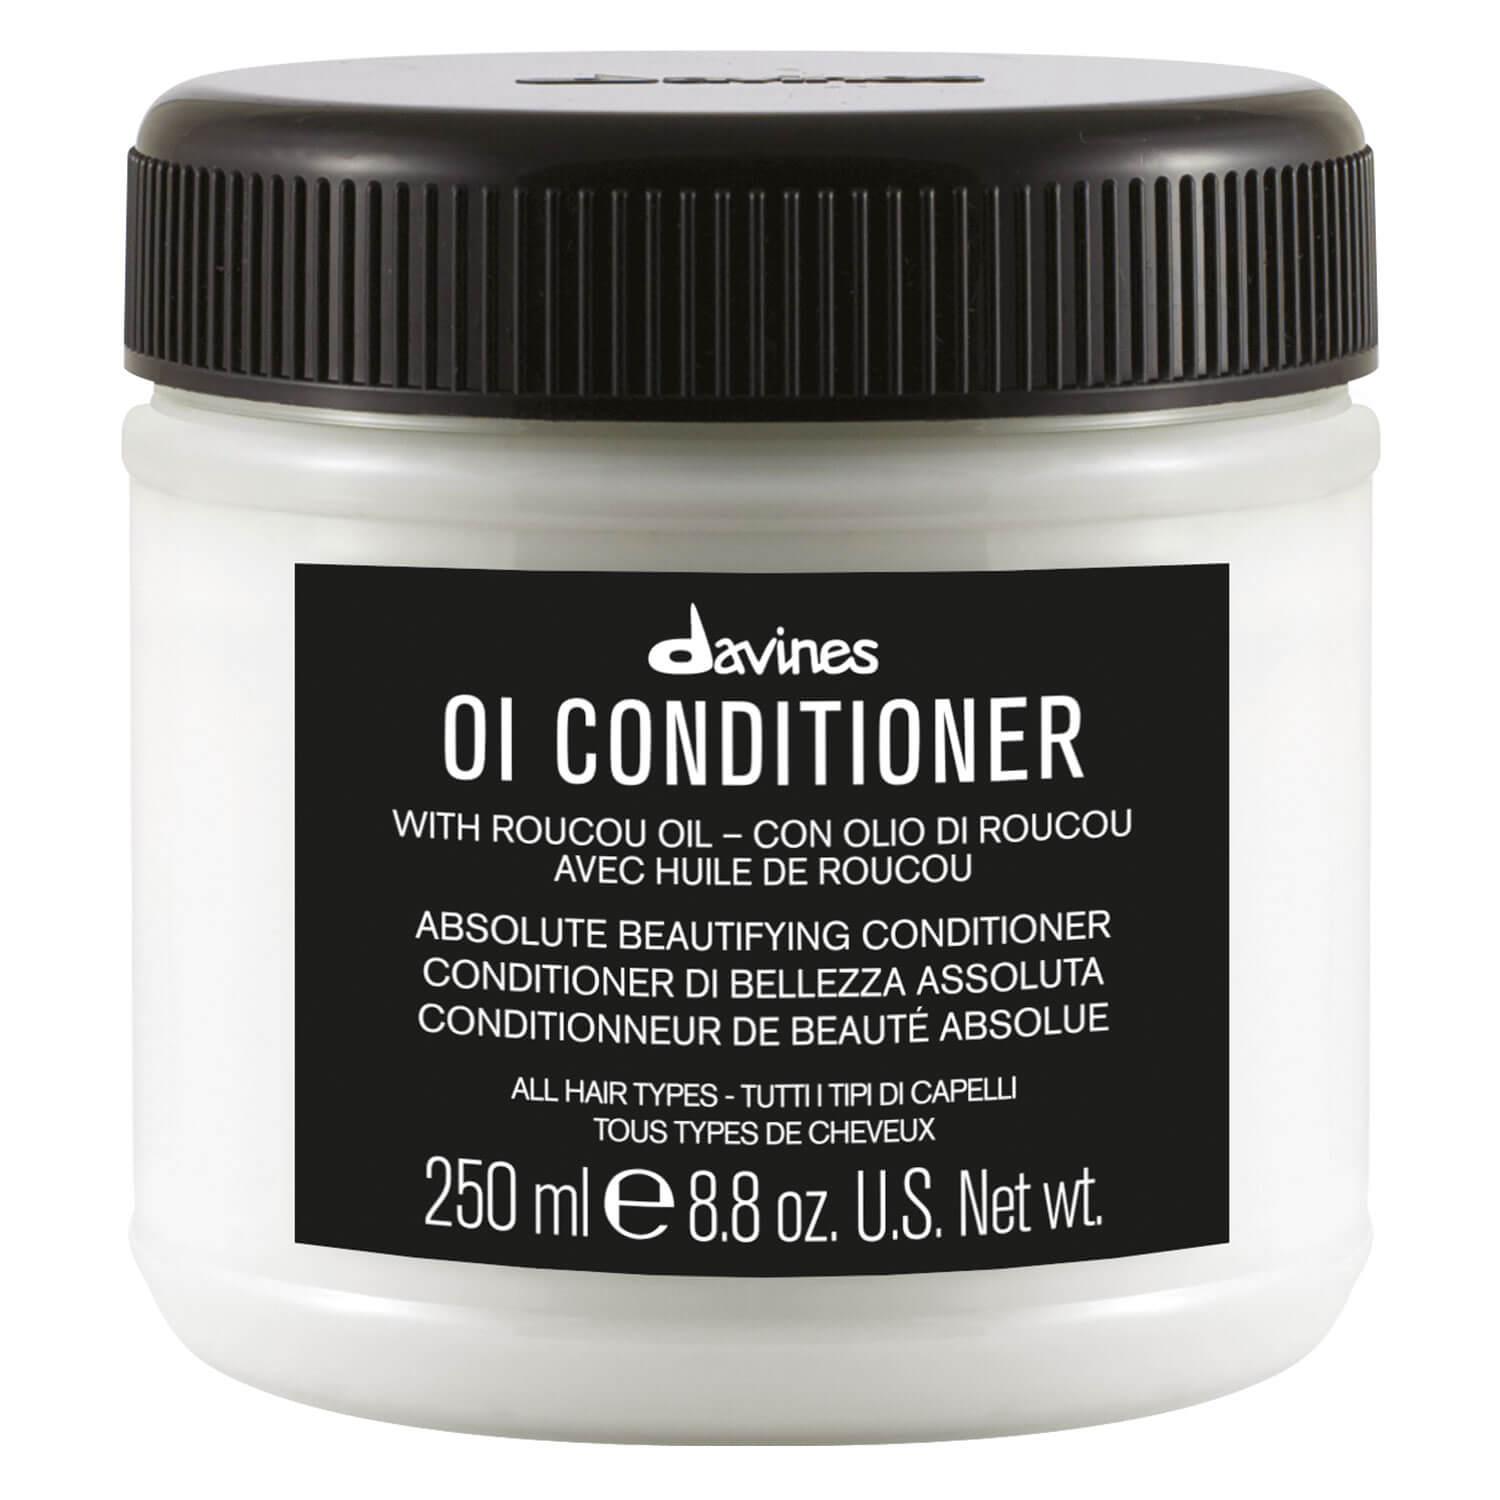 Oi - Absolute Beautifying Conditioner